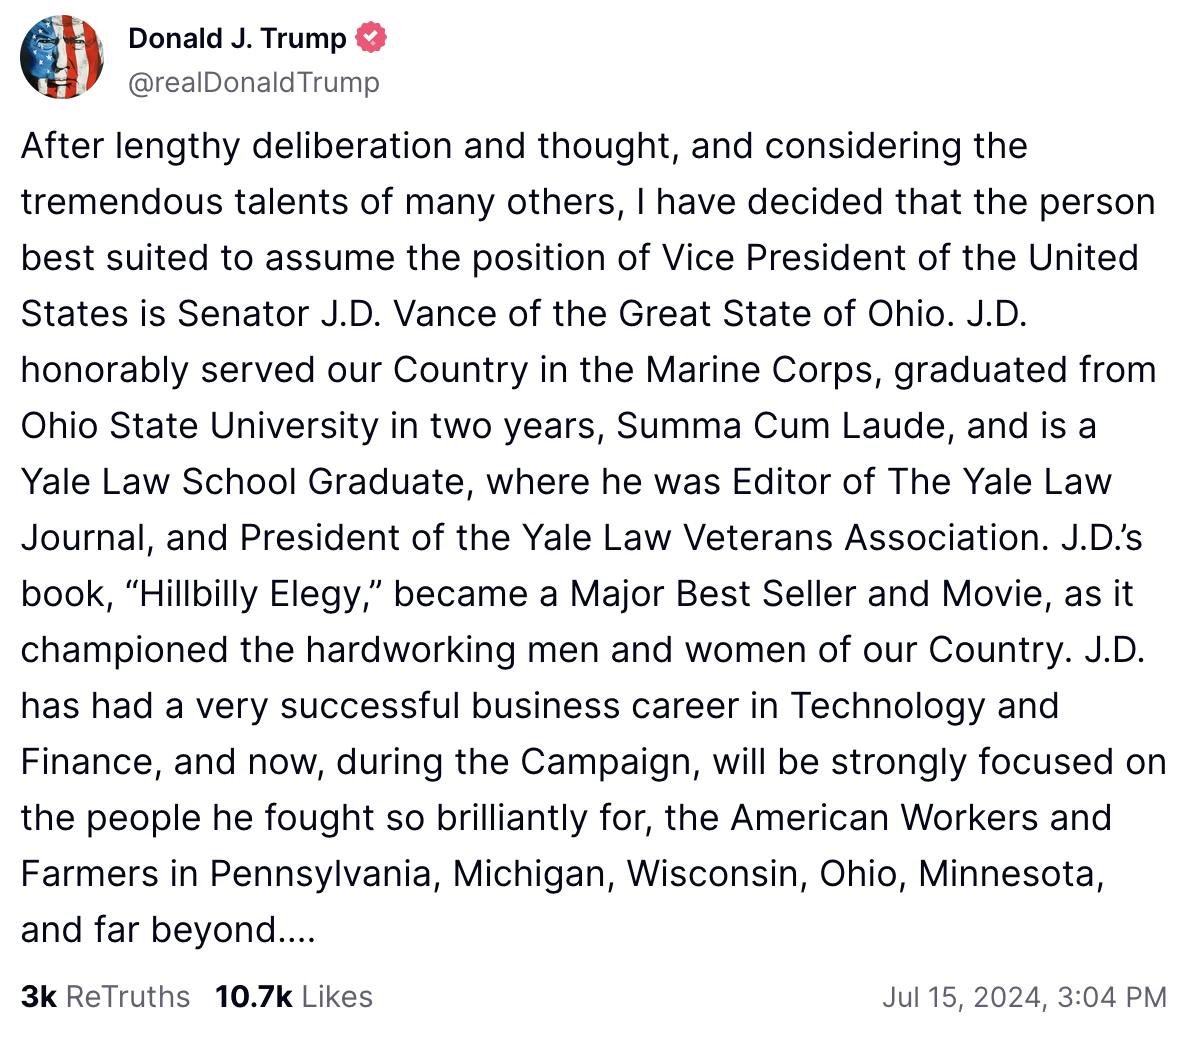 Trump Truth Social Post: 
After lengthy deliberation and thought, and considering the tremendous talents of many others, I have decided that the person best suited to assume the position of Vice President of the United States is Senator J.D. Vance of the Great State of Ohio. J.D. honorably served our Country in the Marine Corps, graduated from Ohio State University in two years, Summa Cum Laude, and is a Yale Law School Graduate, where he was Editor of The Yale Law Journal, and President of the Yale Law Veterans Association. J.D.’s book, “Hillbilly Elegy,” became a Major Best Seller and Movie, as it championed the hardworking men and women of our Country. J.D. has had a very successful business career in Technology and Finance, and now, during the Campaign, will be strongly focused on the people he fought so brilliantly for, the American Workers and Farmers in Pennsylvania, Michigan, Wisconsin, Ohio, Minnesota, and far beyond….